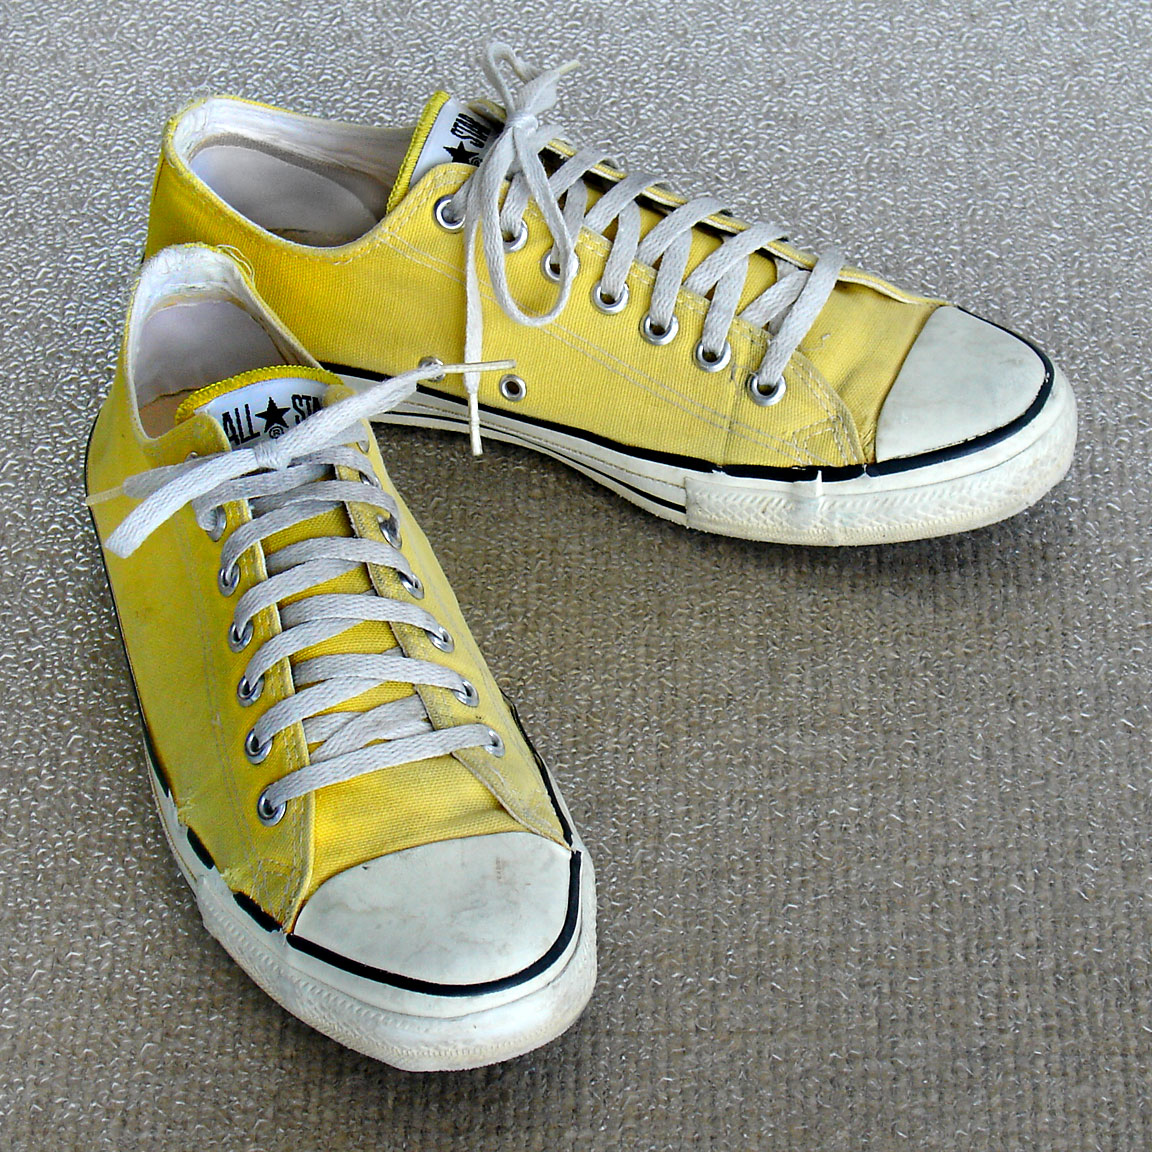 Vintage yellow American-made Converse All Star Chuck Taylor shoes for sale at http://www.collectornet.net/shoes